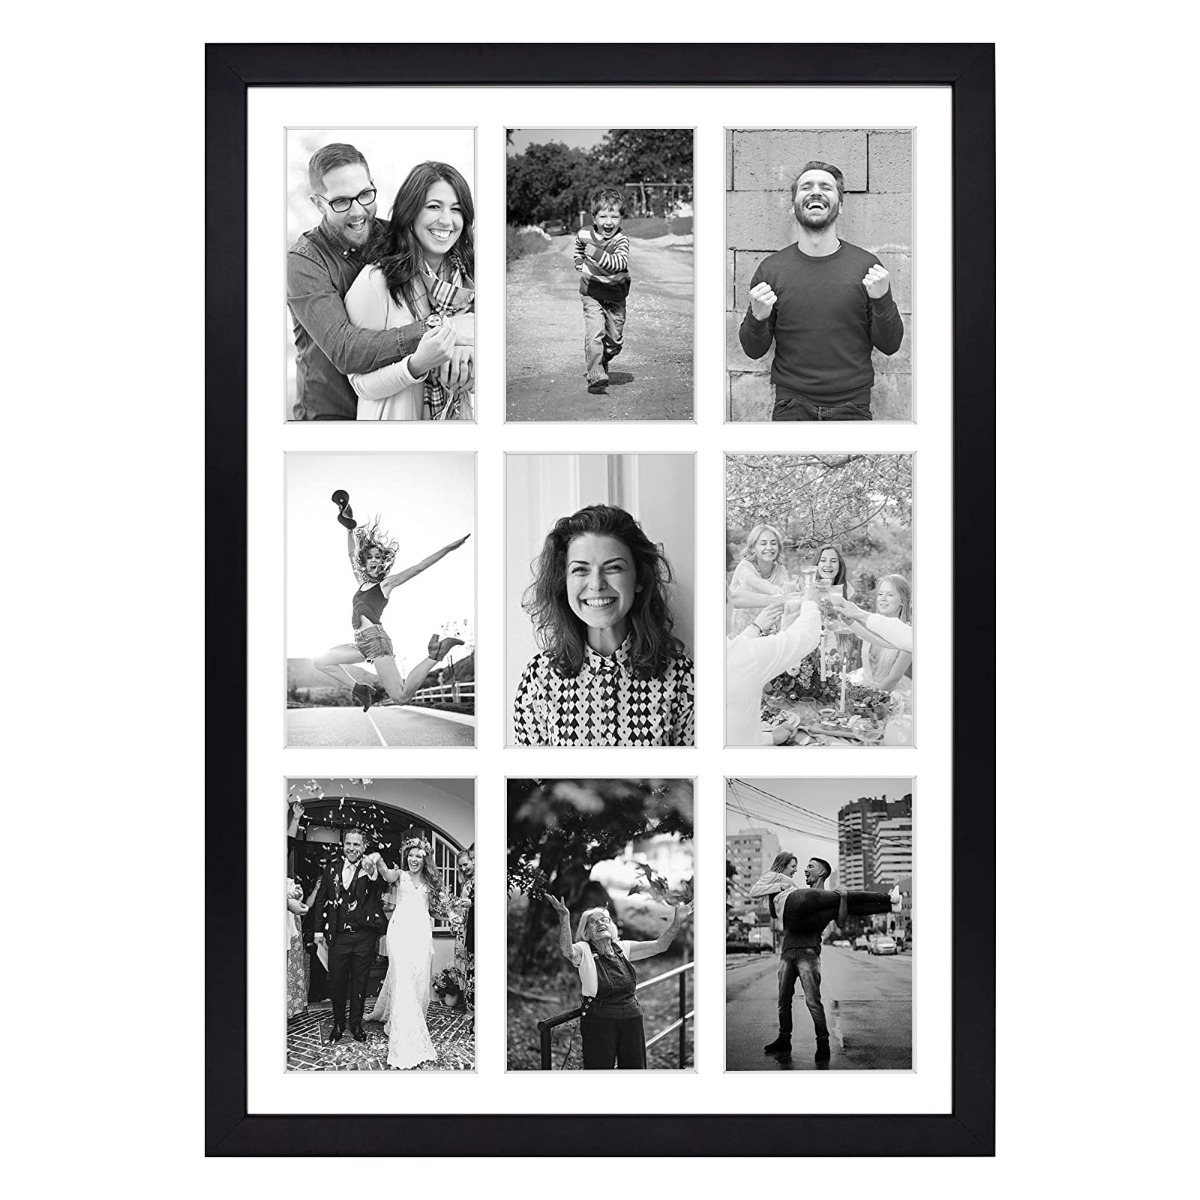 Golden State Art, 8x10 Black Photo Wood Collage Frame with Real Glass and White Mat Displays (2) 4x6 Pictures